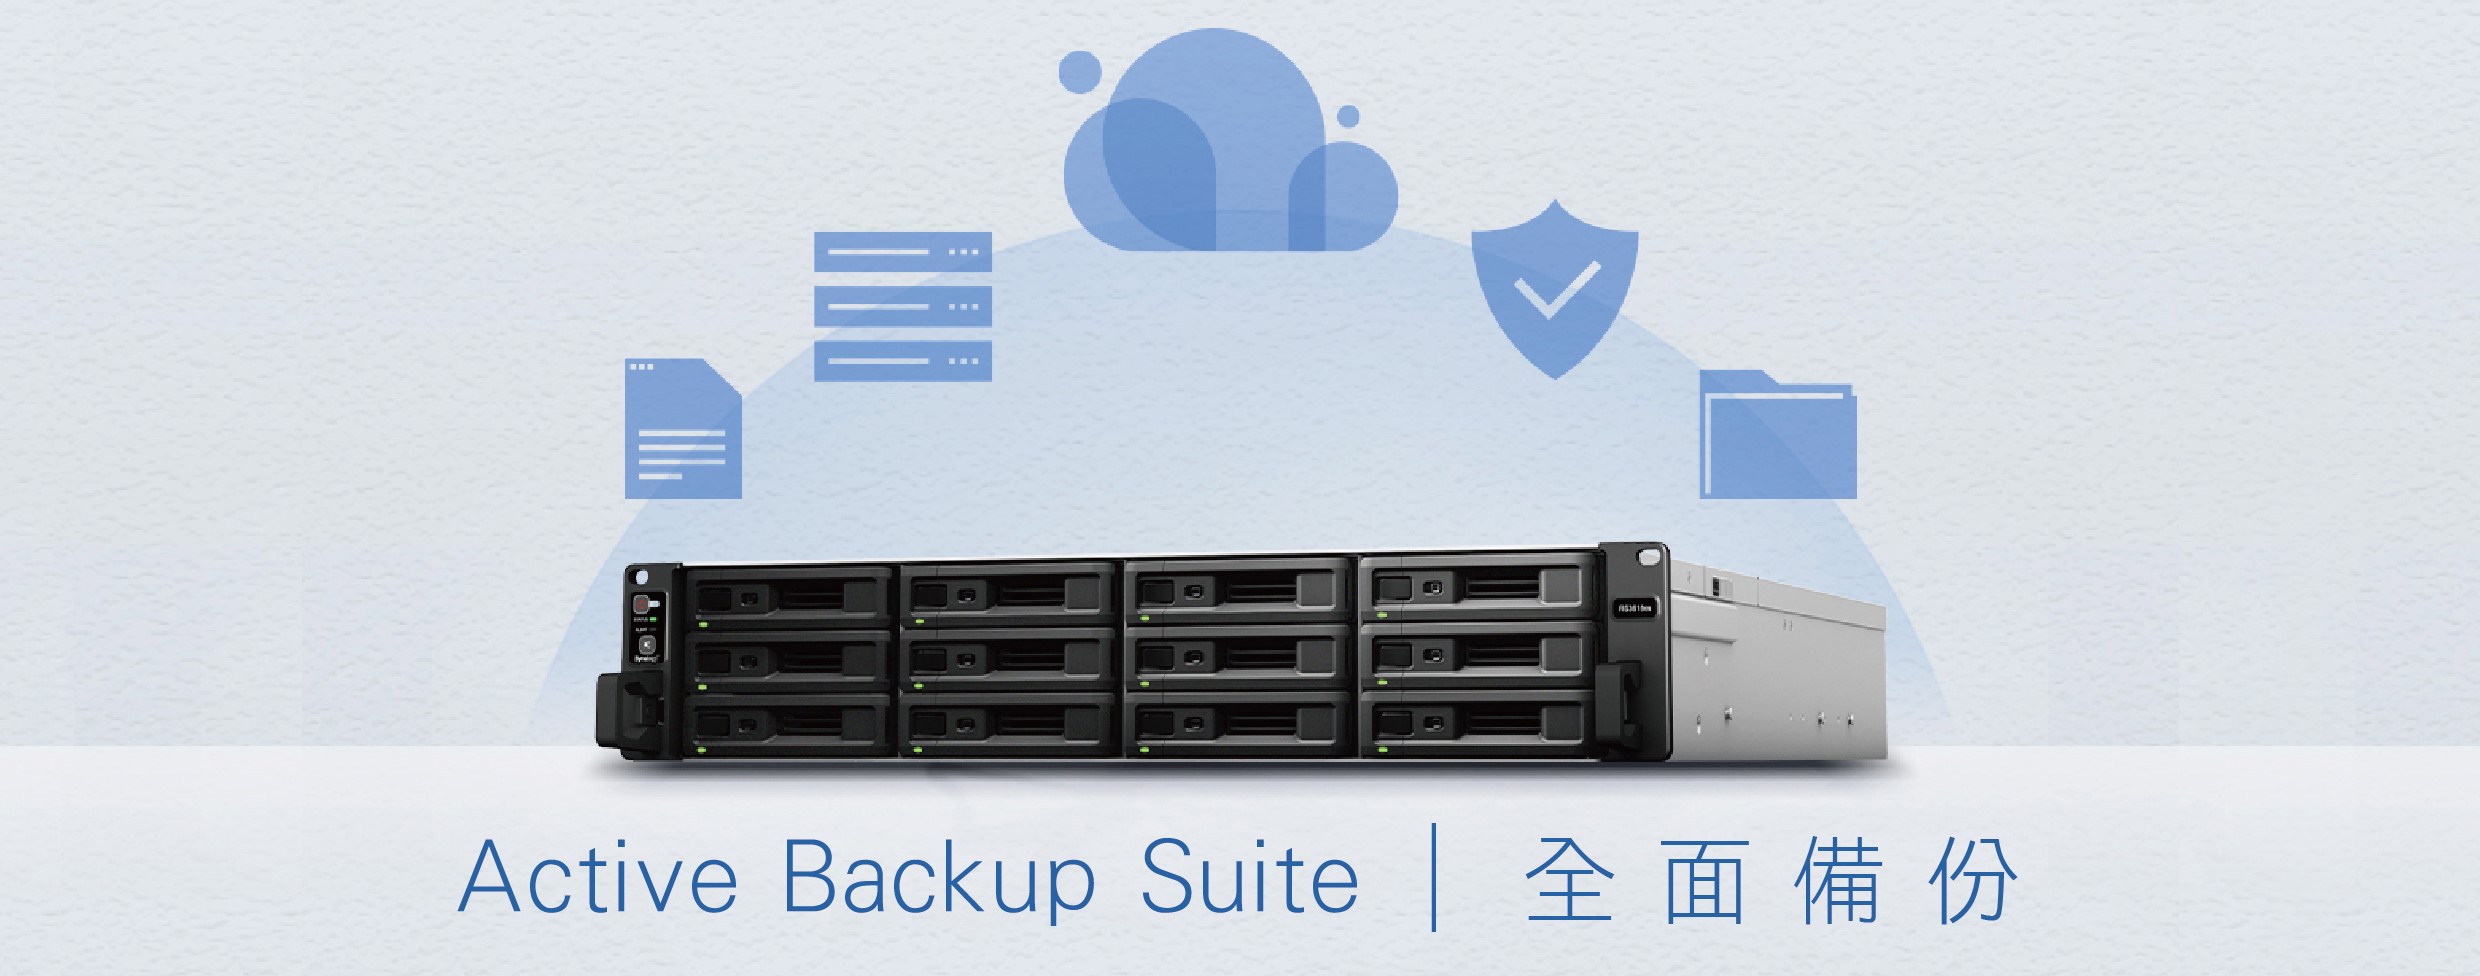 Synology – ActiveBackupSuite / 全面備份 / 群暉Synology NAS / 網路儲存裝置 / Network Attached Storage